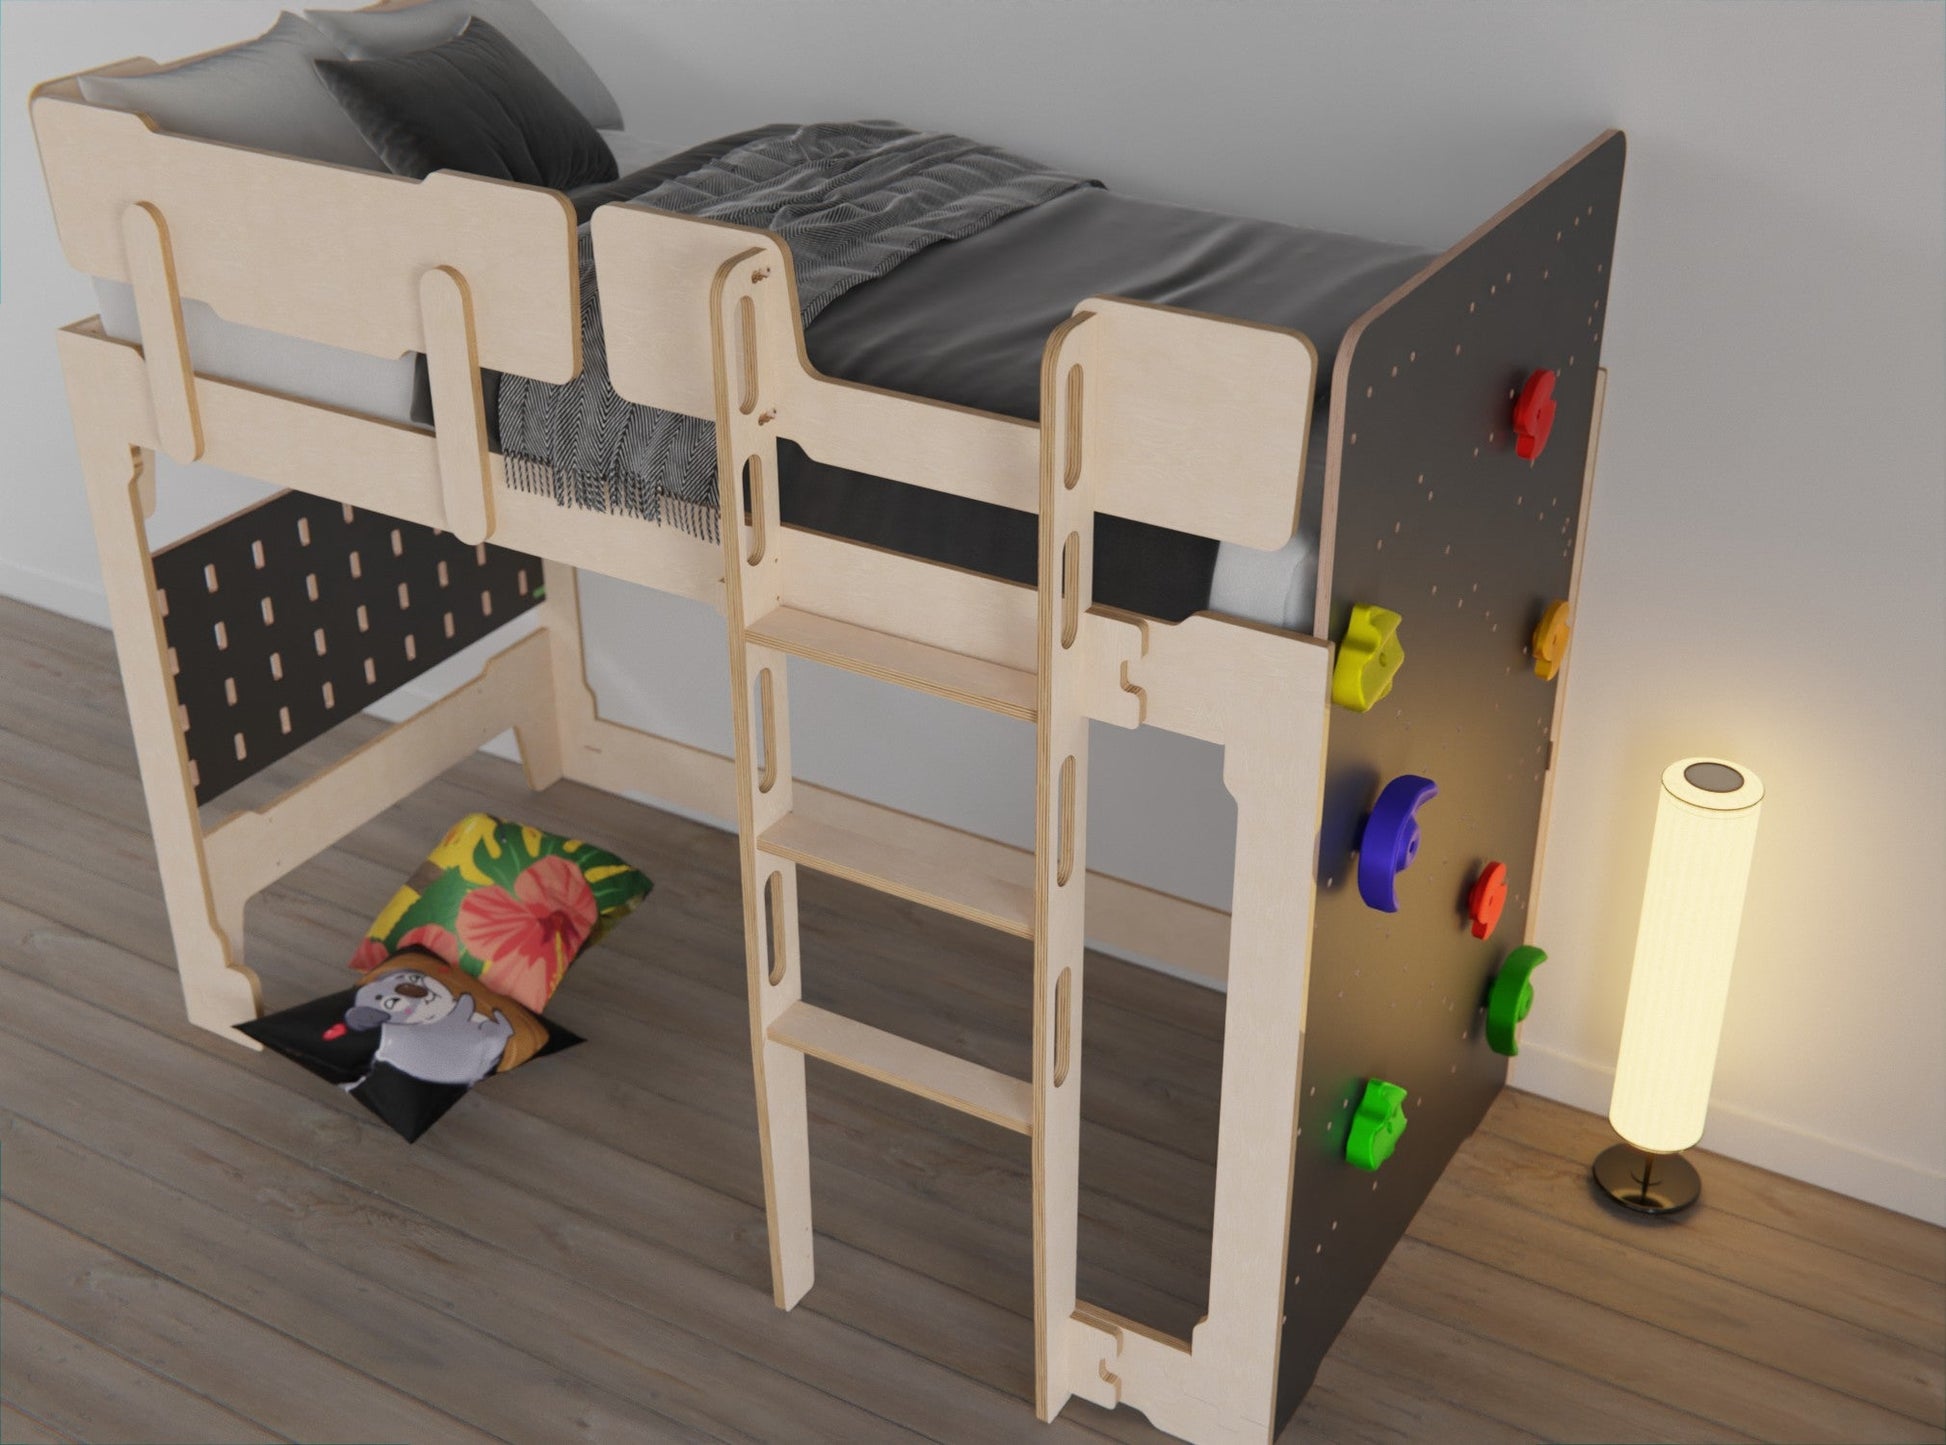 Enjoy our Transformer Loft Bed: an adaptable 3-in-1 design with rock climbing wall.